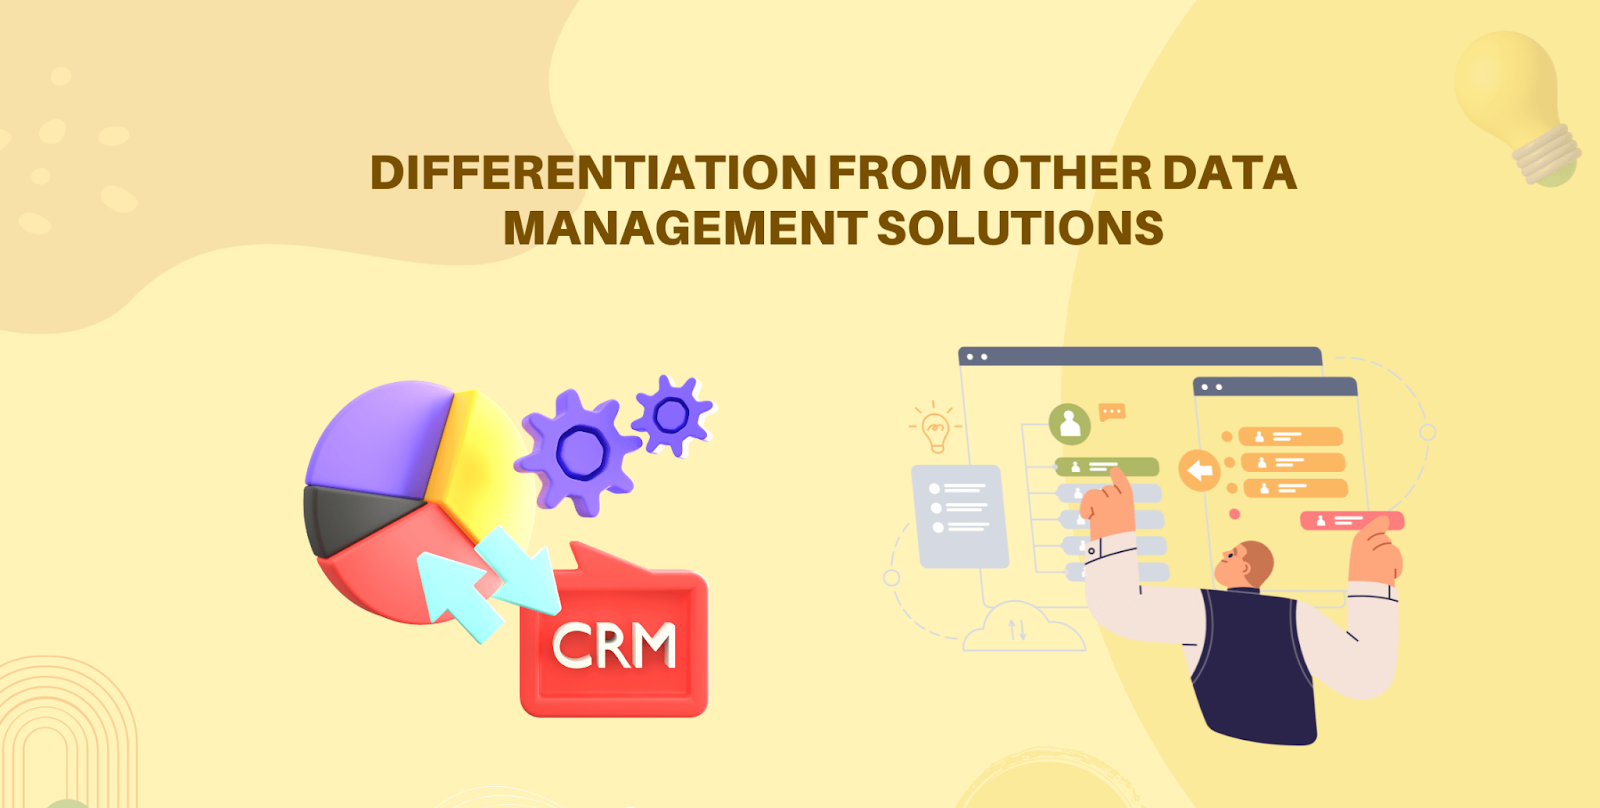 Customer Data Platform Differentiation from Other Data Management Solutions